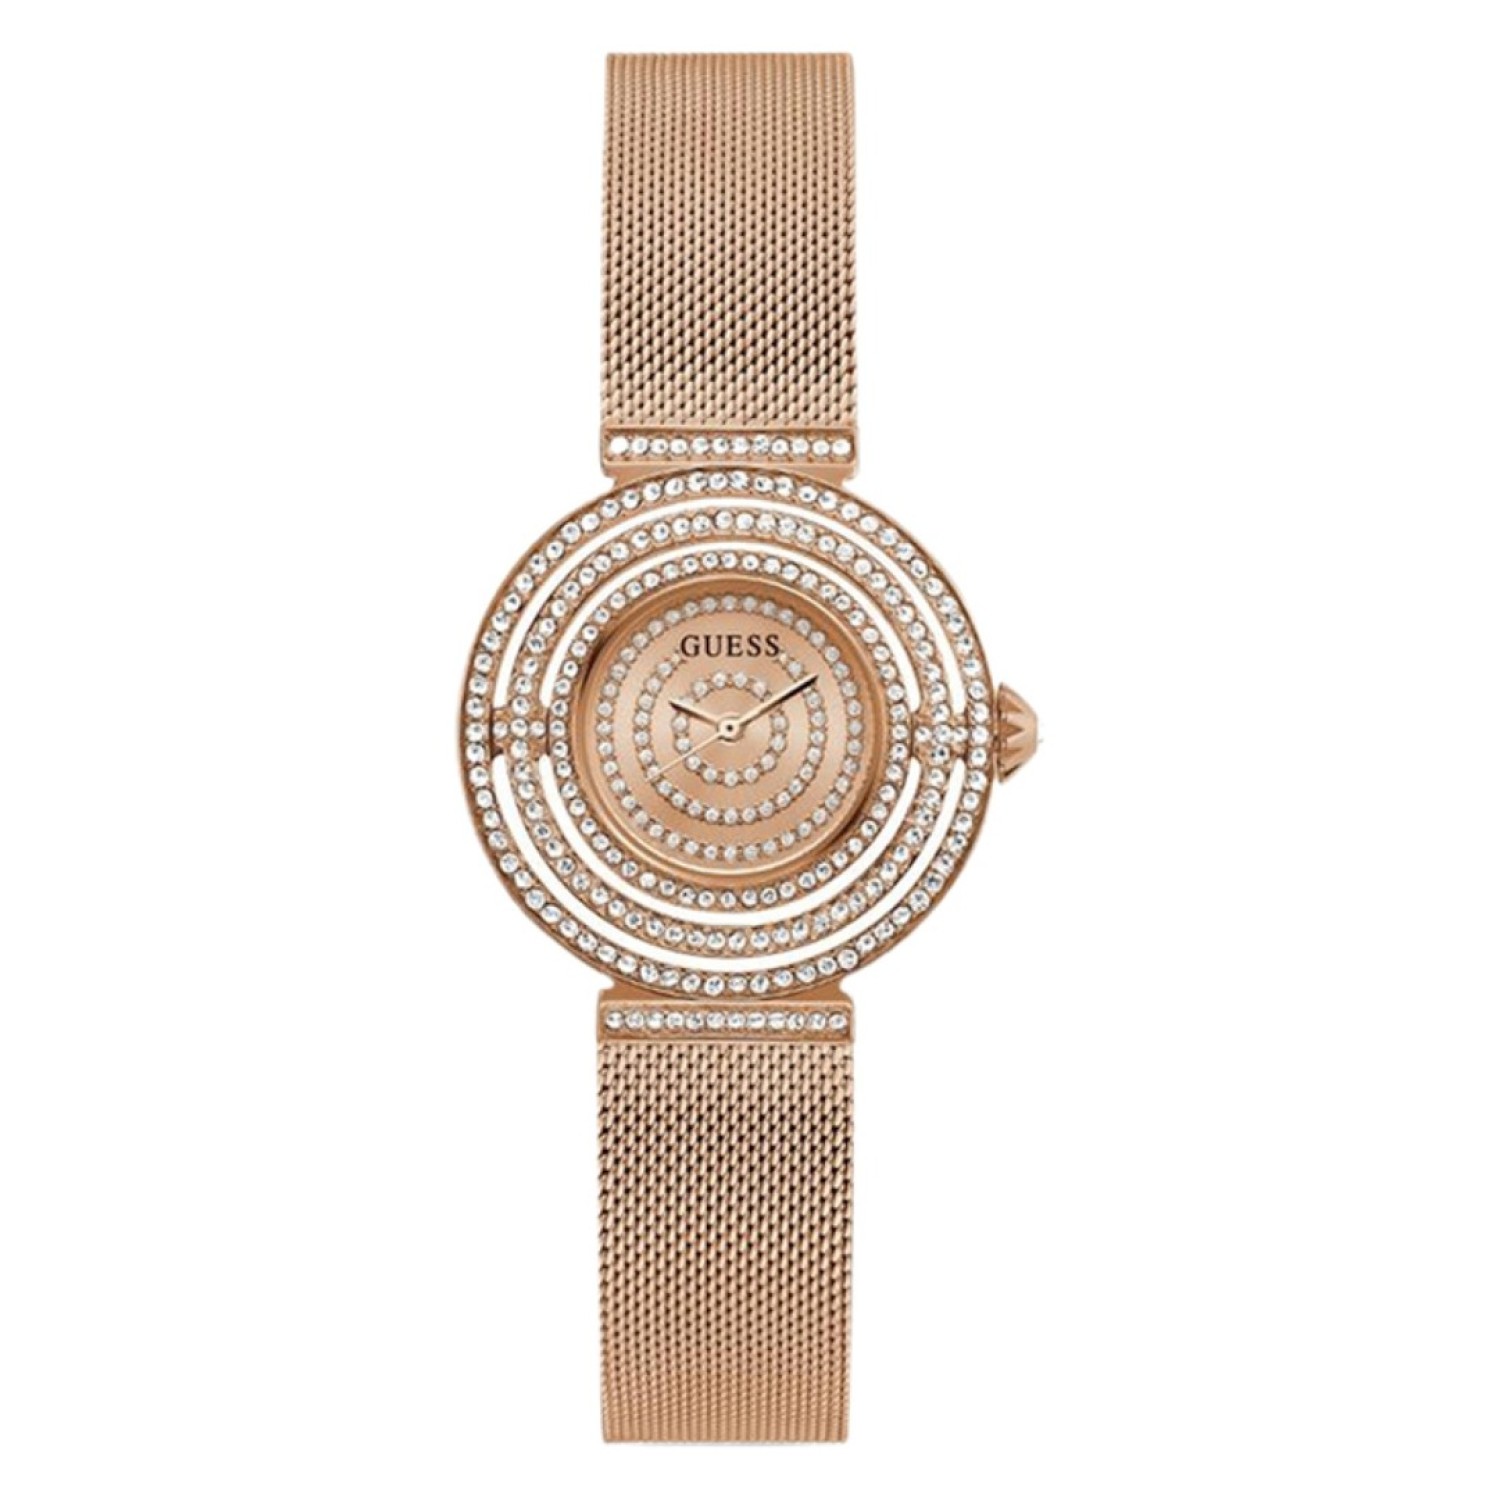   The GW0550L3 Guess Dream Rose- Tone watch is a stunning timepiece that exudes elegance and sophistication.